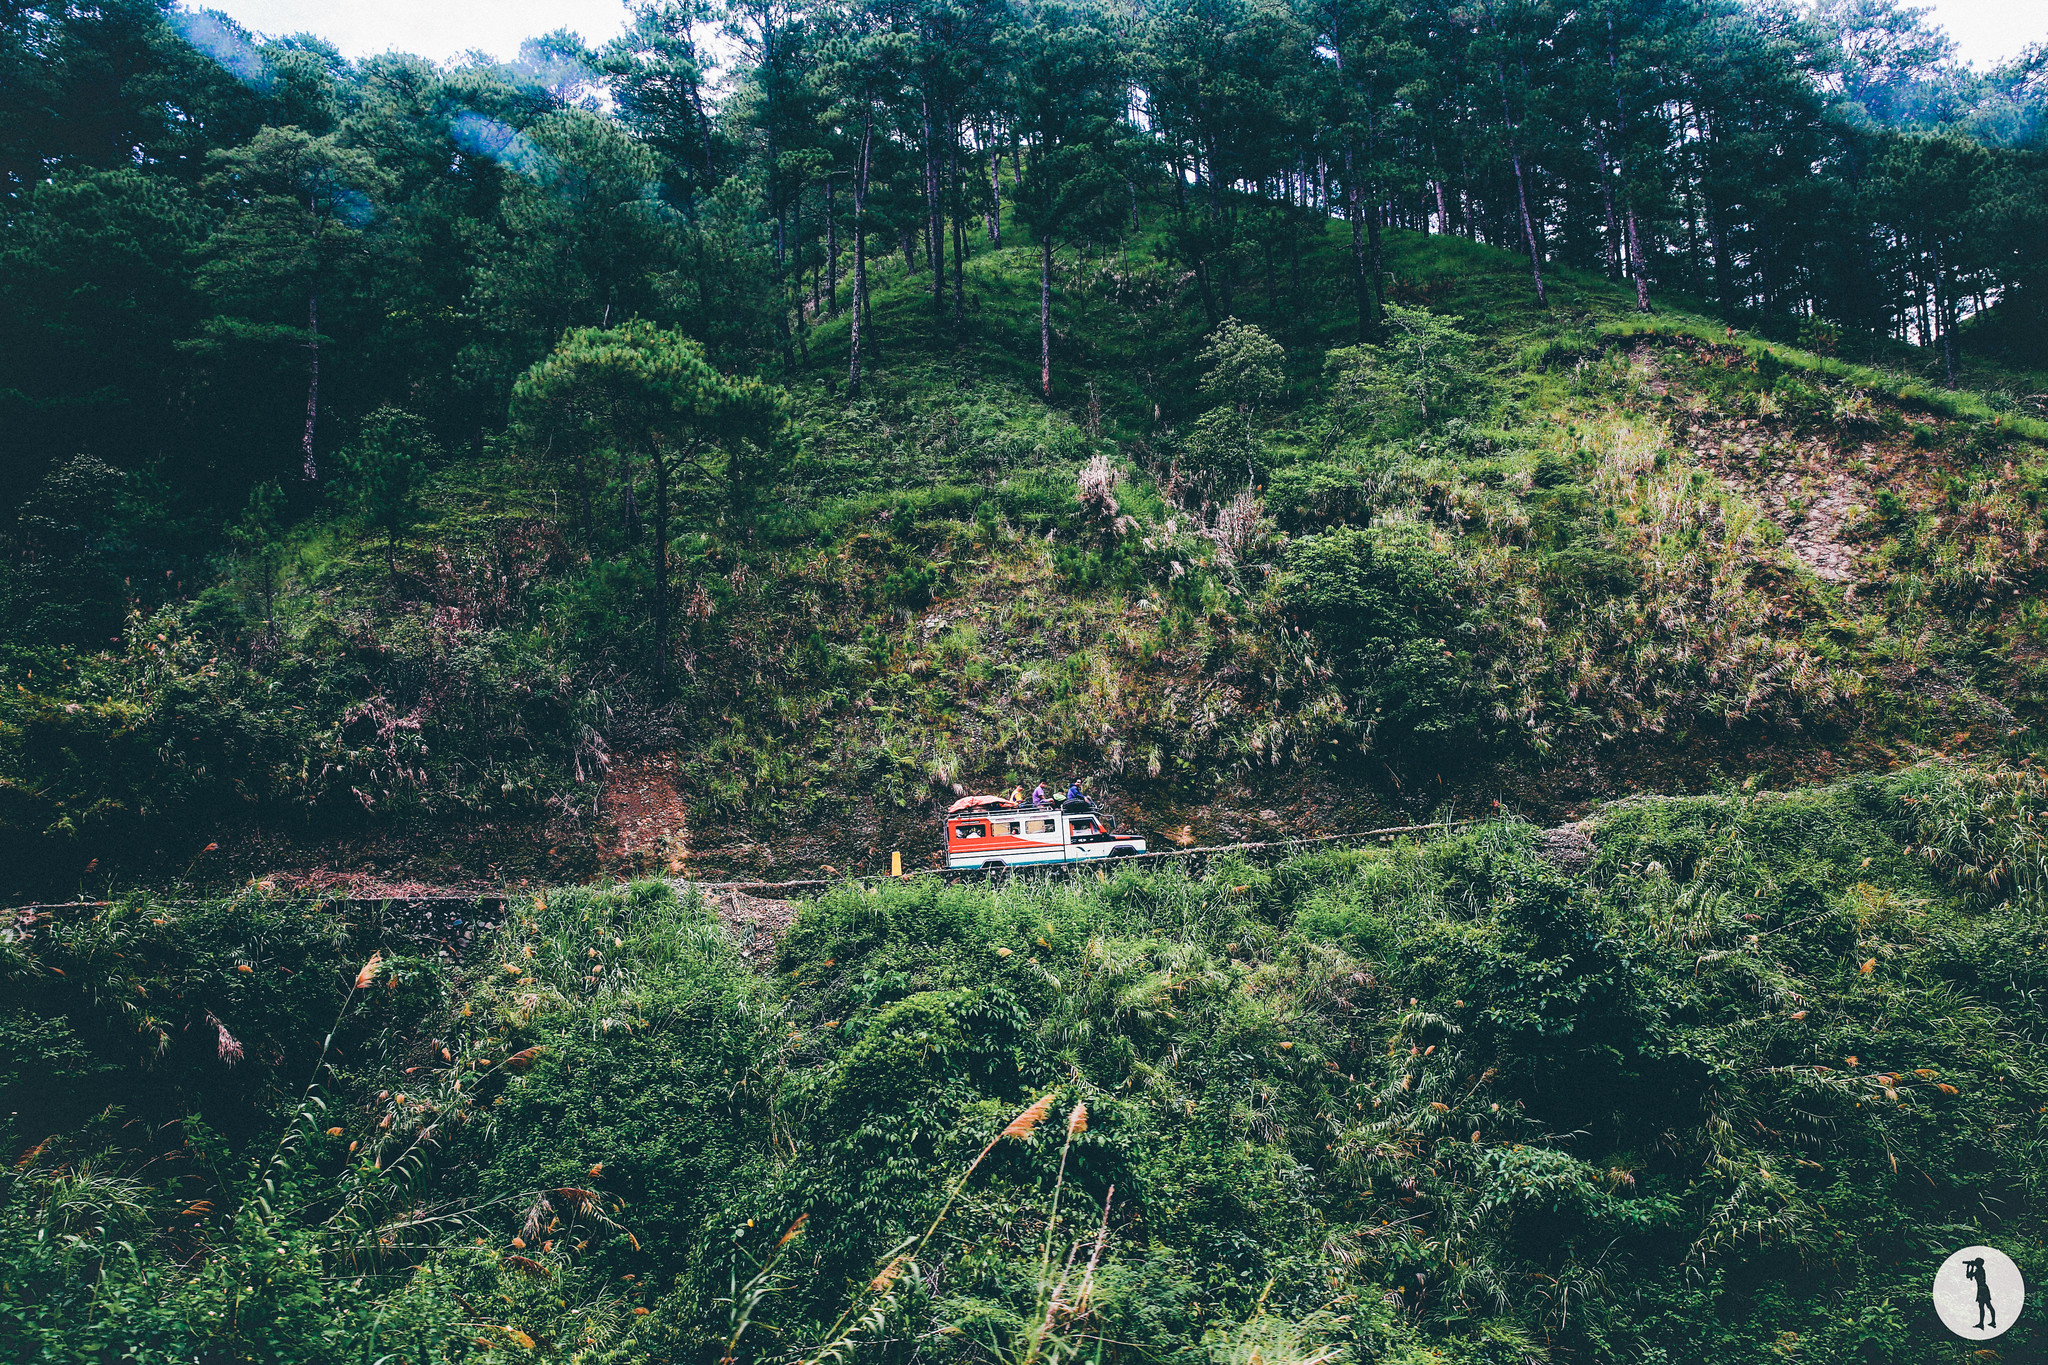 Travel to the Philippines - North Luzon, landscapes from the autobus to the rice terraces